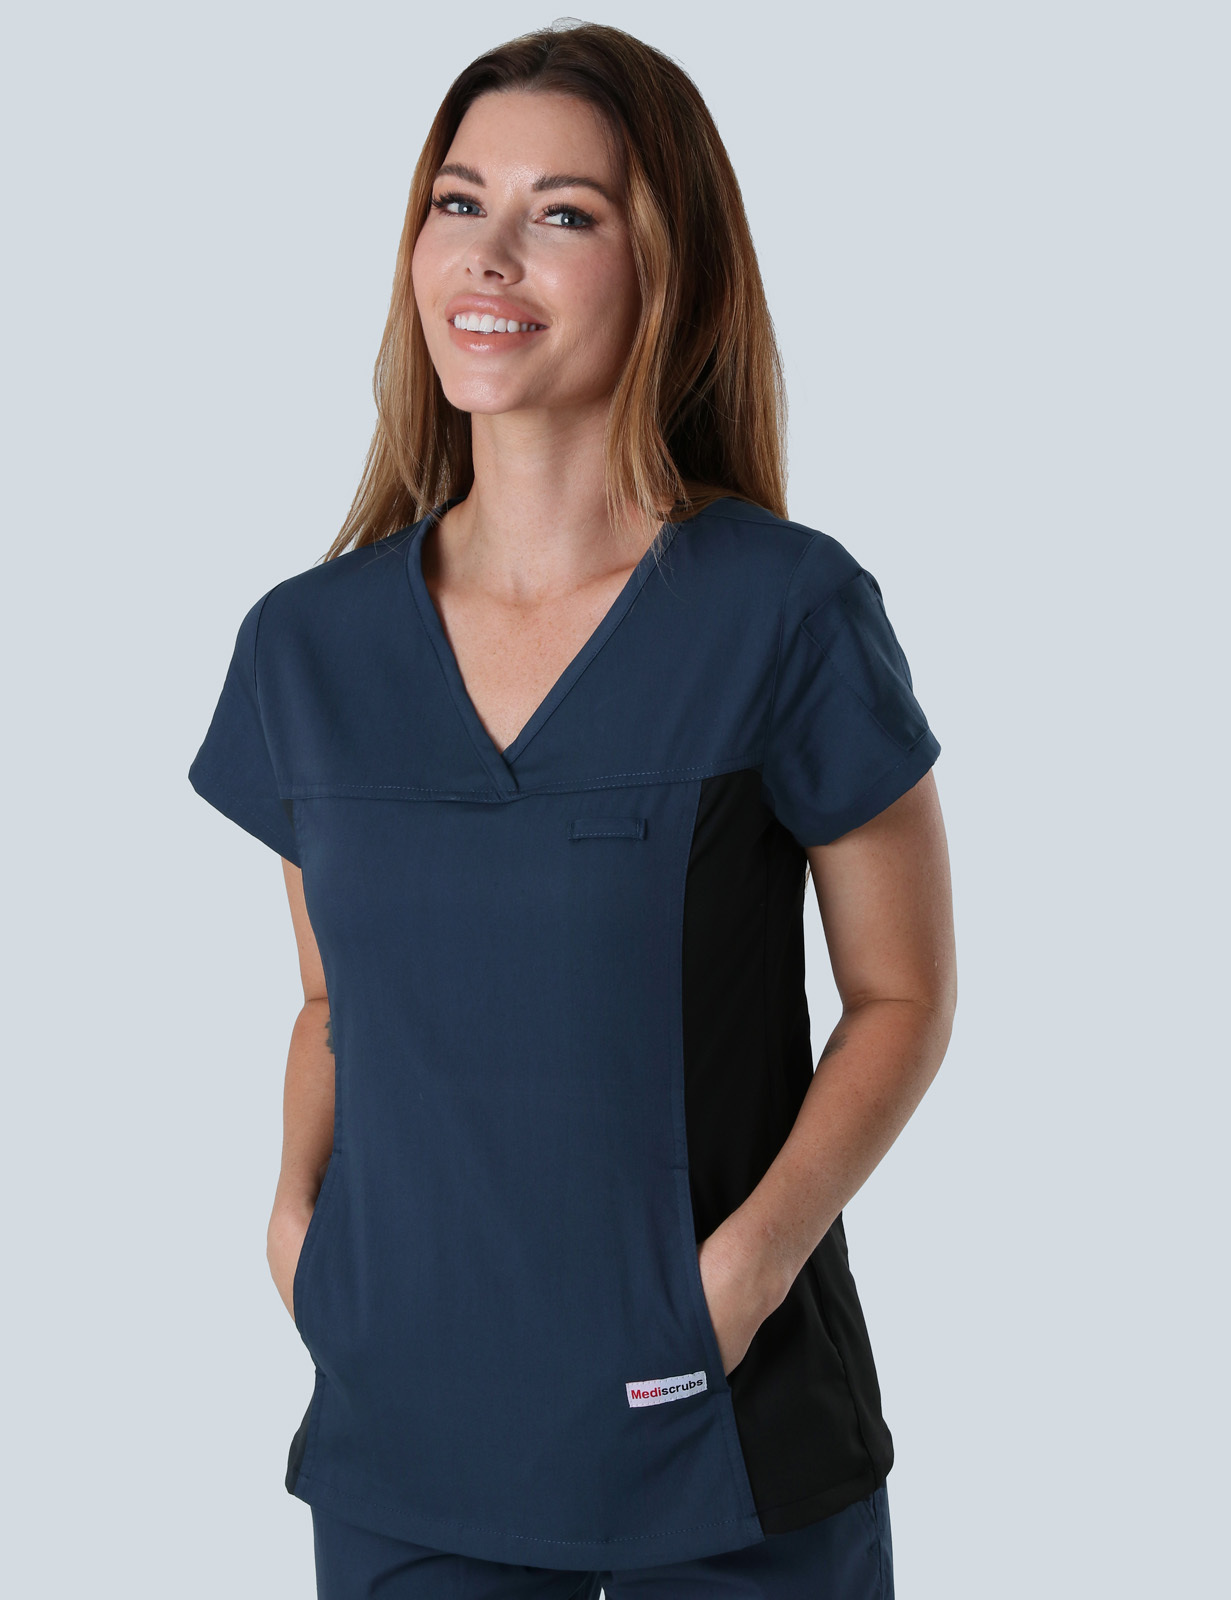 Weipa Hospital - ED RN (Women's Fit Spandex Scrub Top and Cargo Pants in Navy incl Logos)